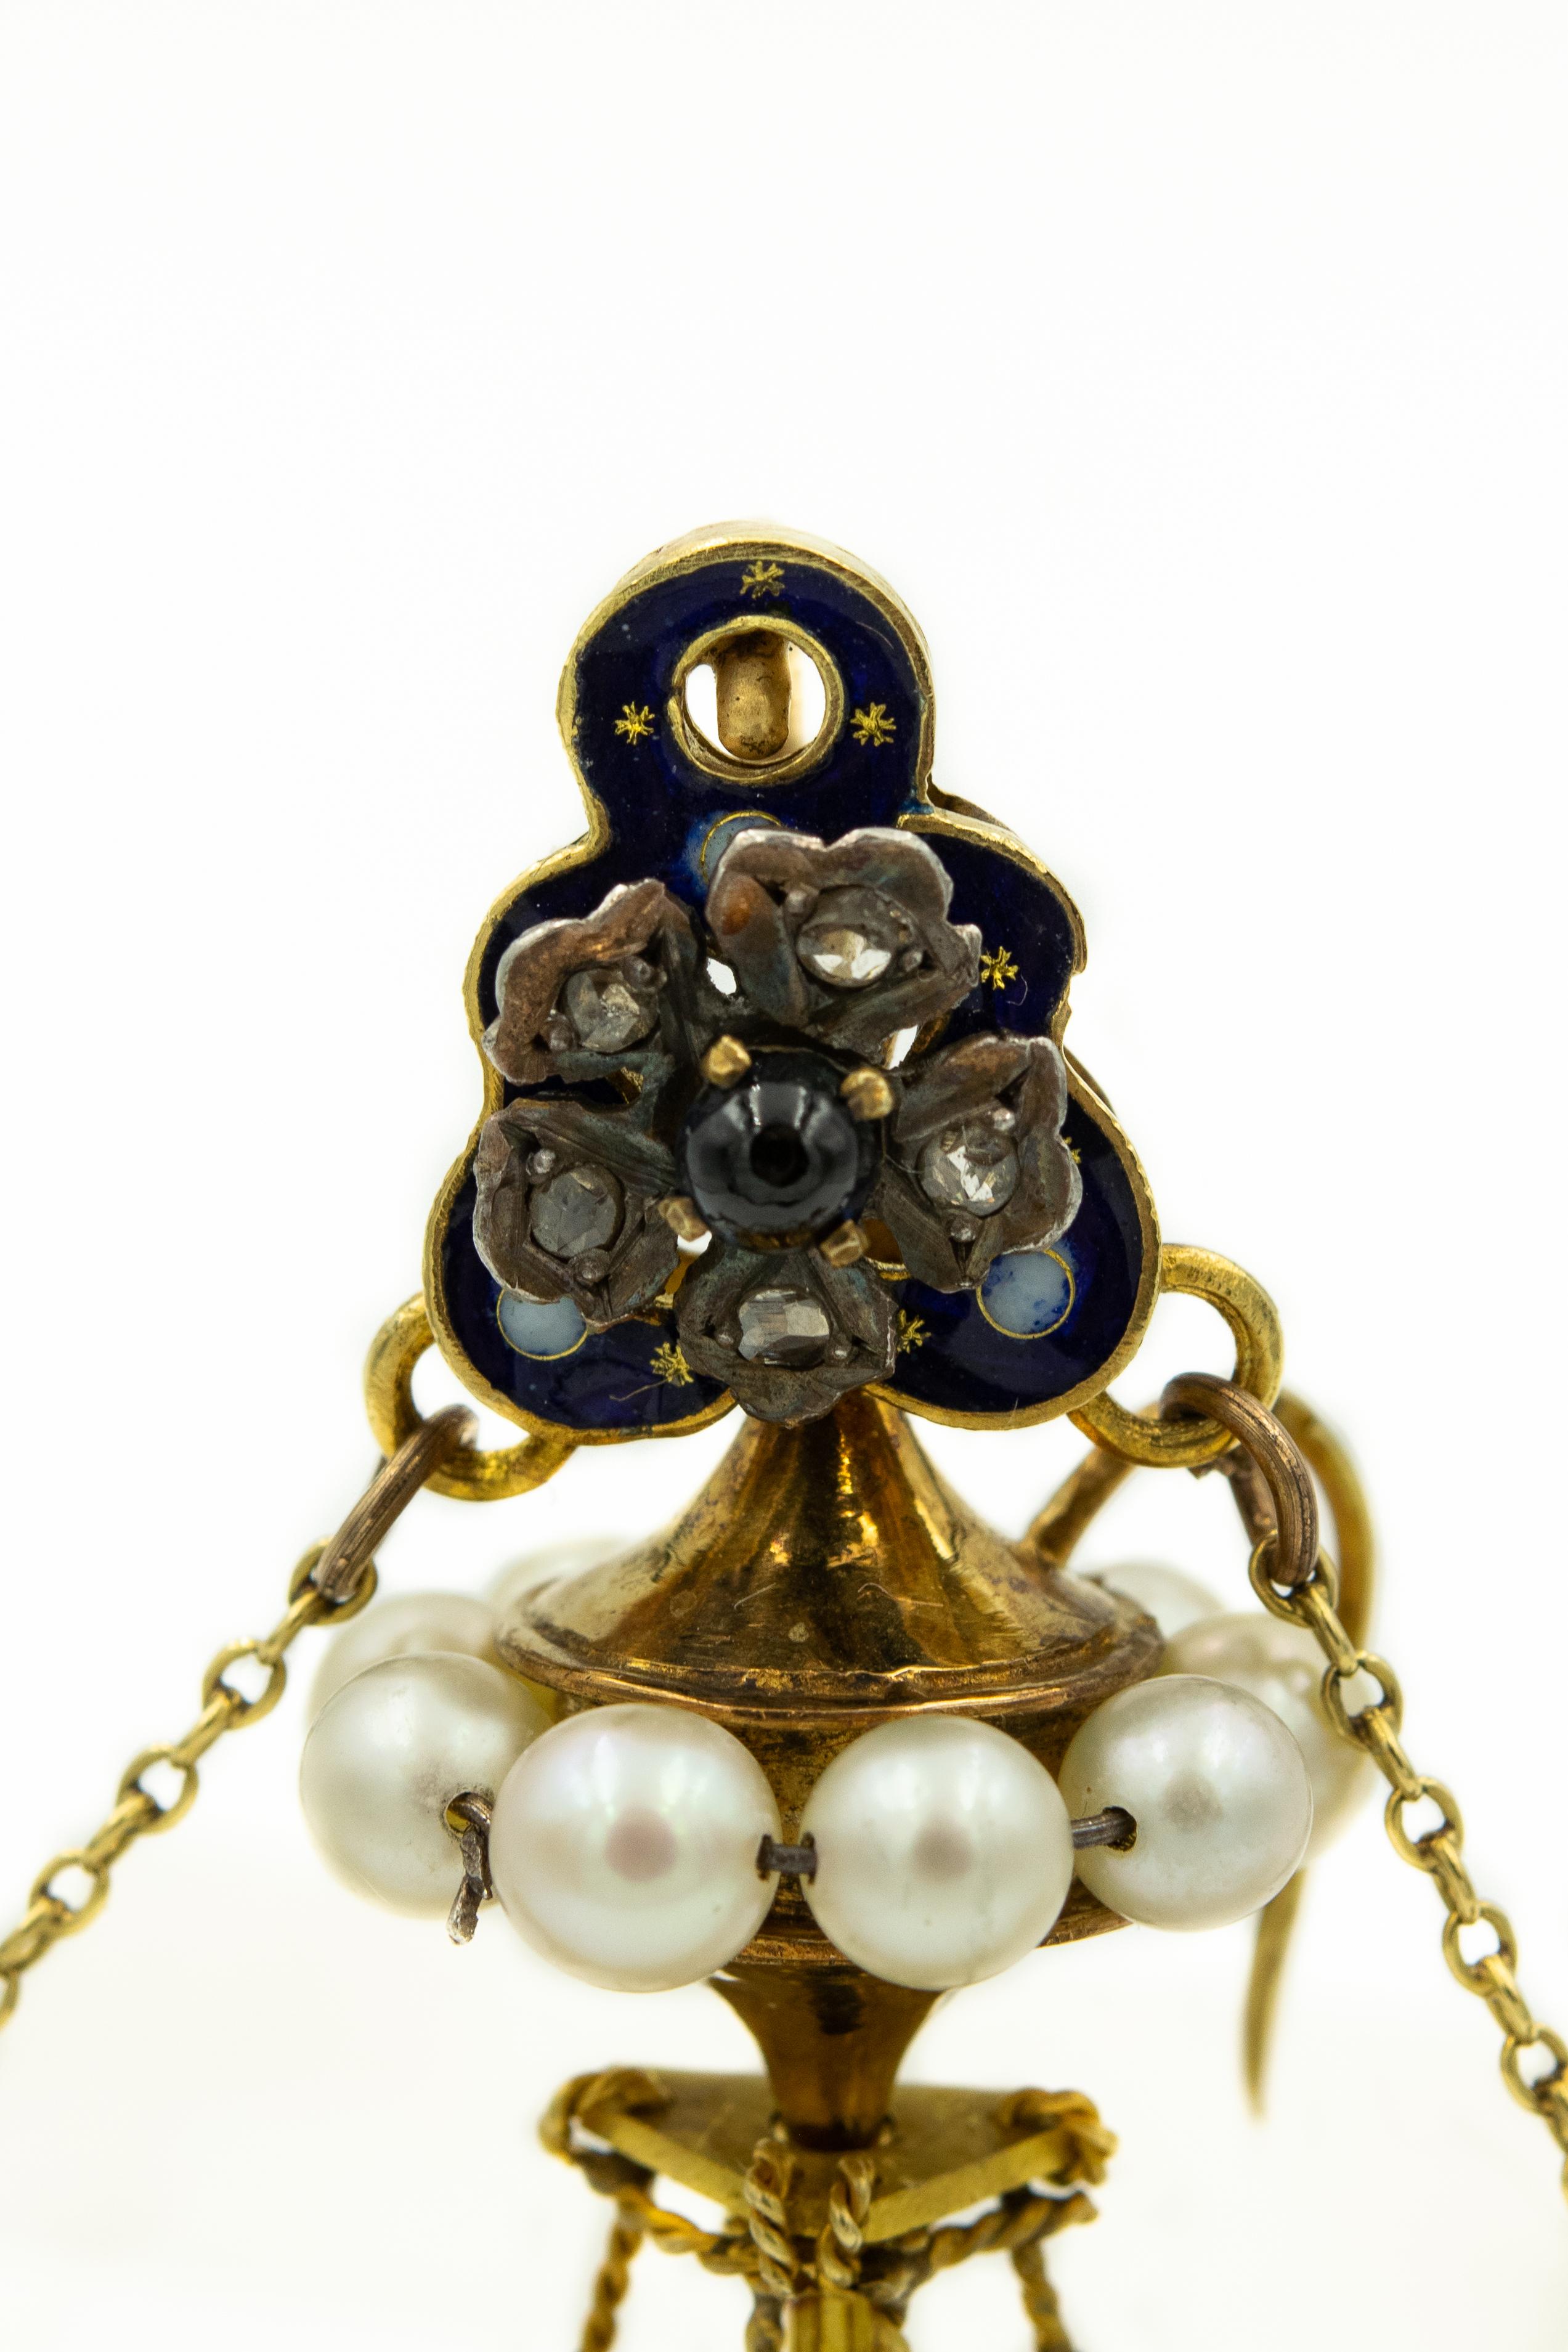 Large 1950's Renaissance revival enamel ship brooch constructed with silver on 14k yellow gold.   The boat is decorated with cultured pearls, rubies, rose cut diamonds, turquoise, chrysoprase and sapphire.  There is a floral design on the enamel as